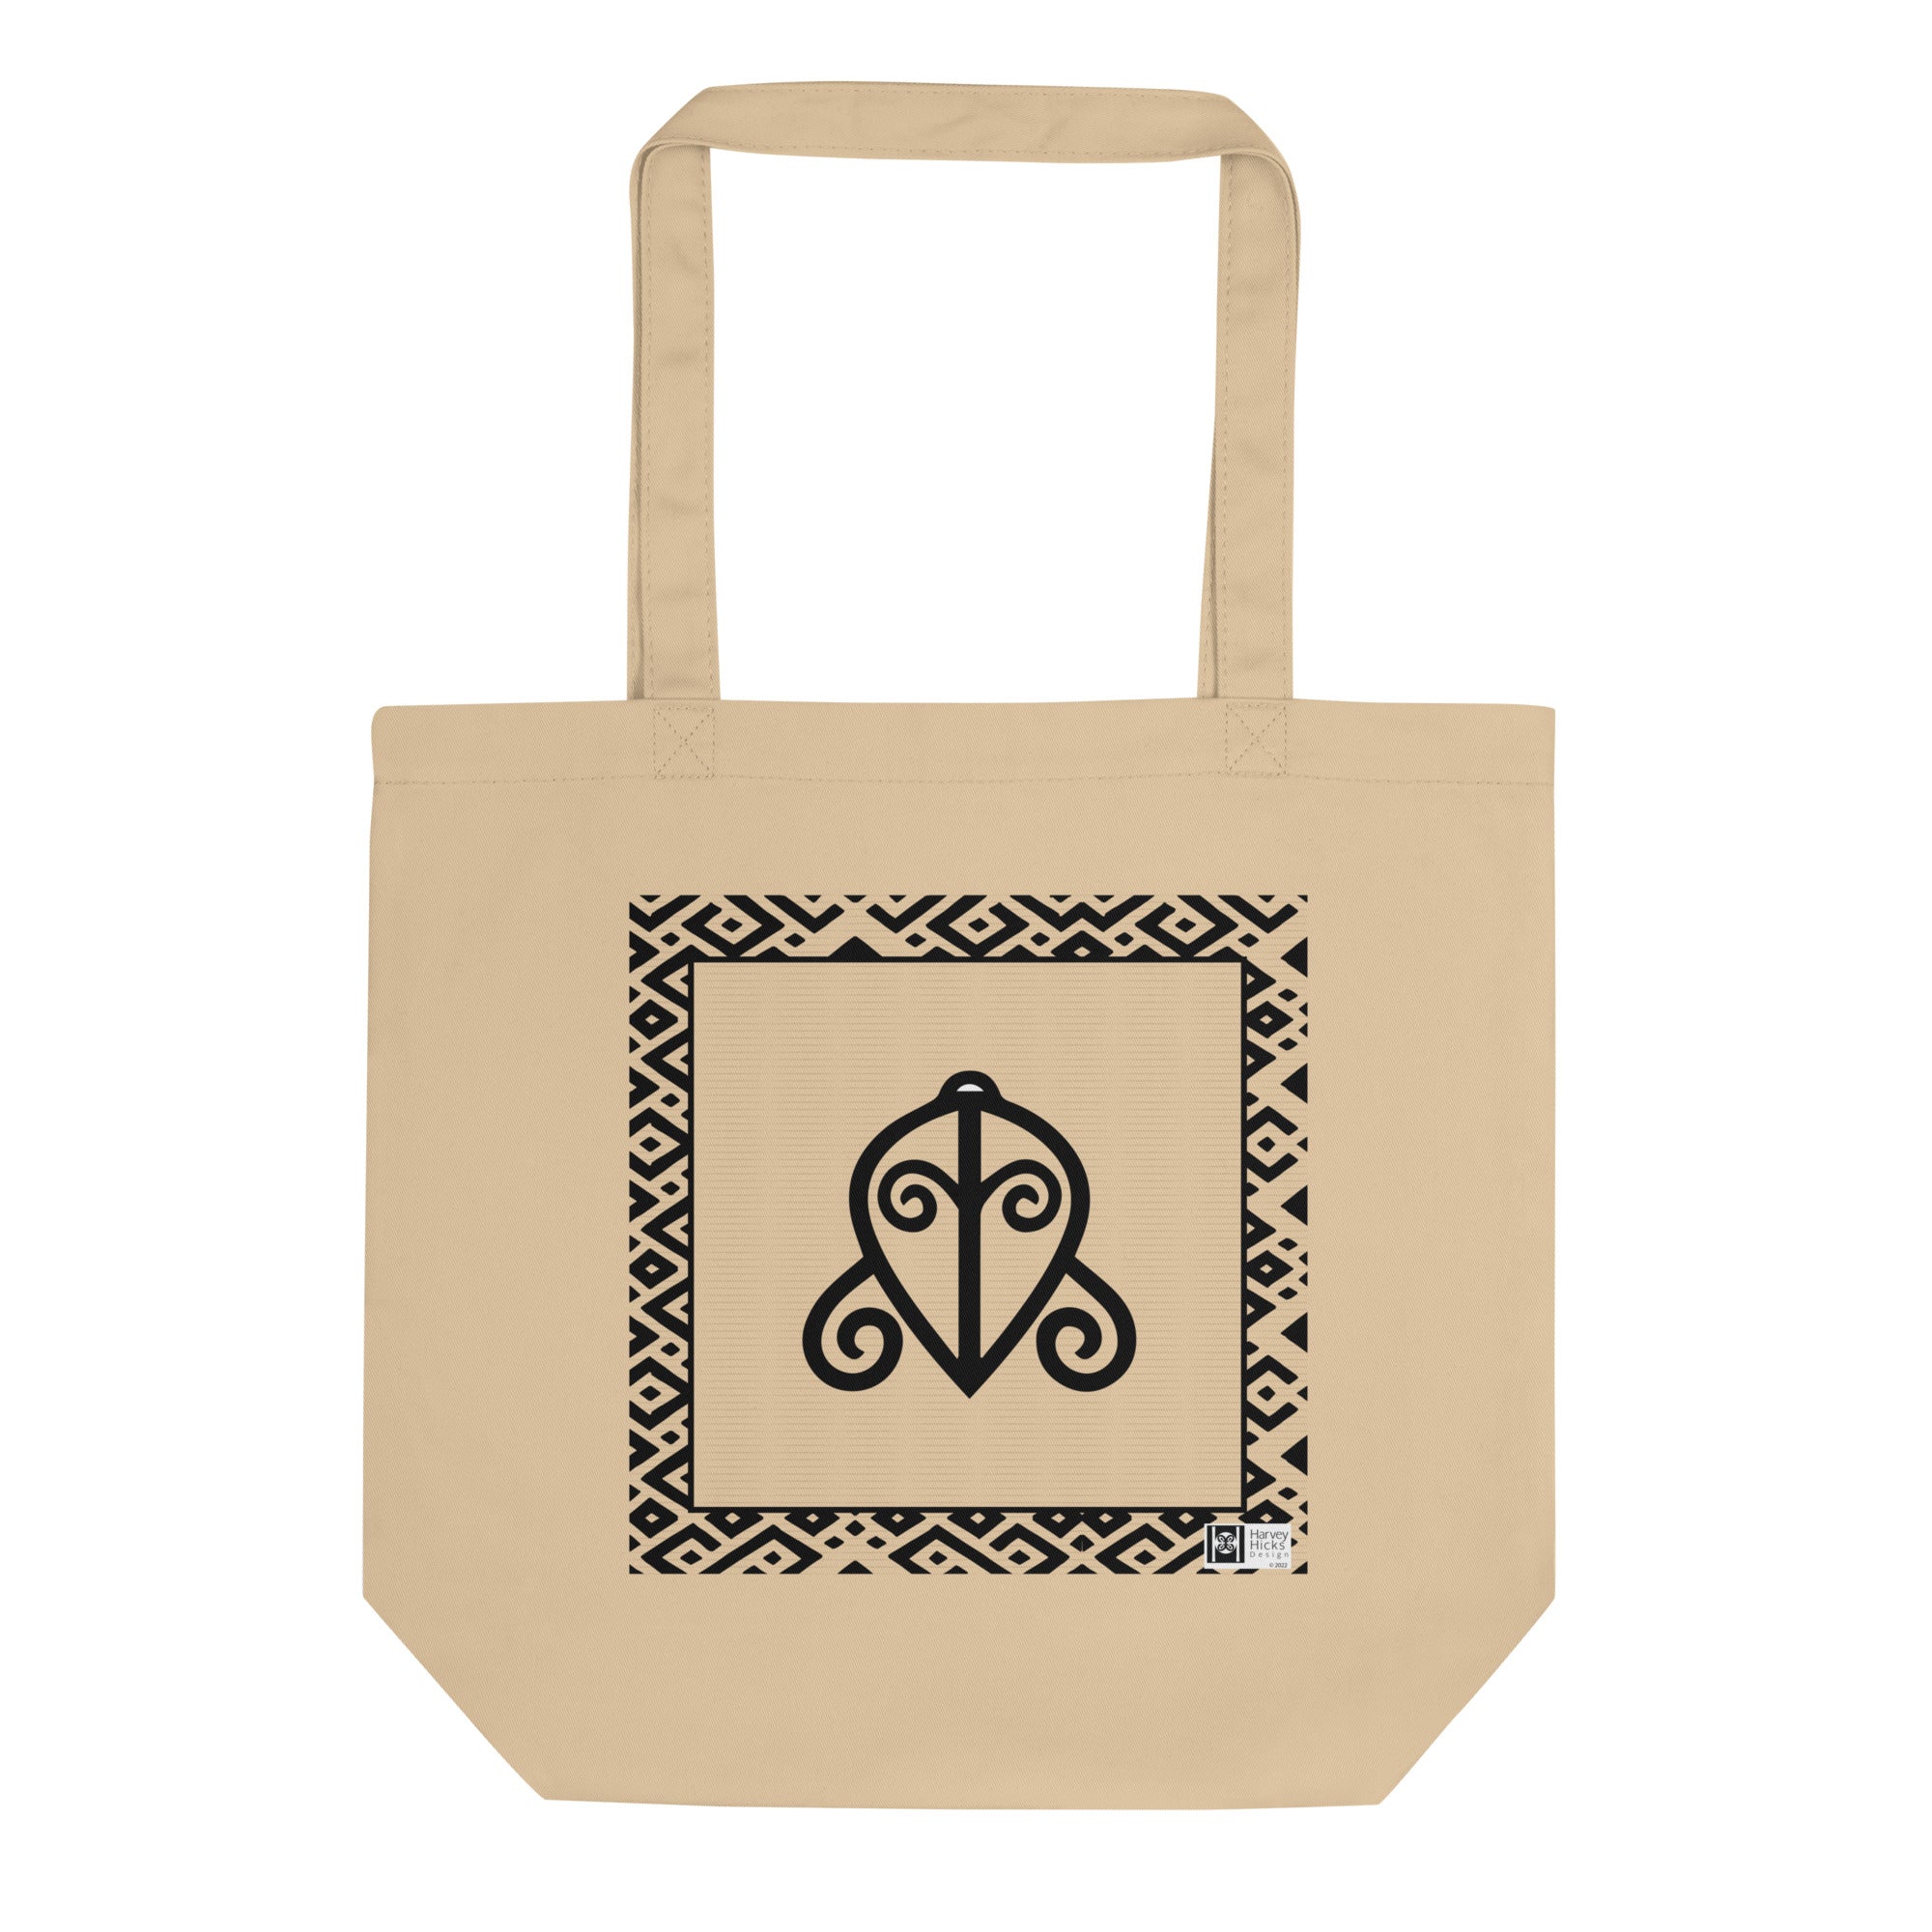 100% cotton Eco Tote Bag, featuring the Adinkra symbol for unconditional love, NO TEXT